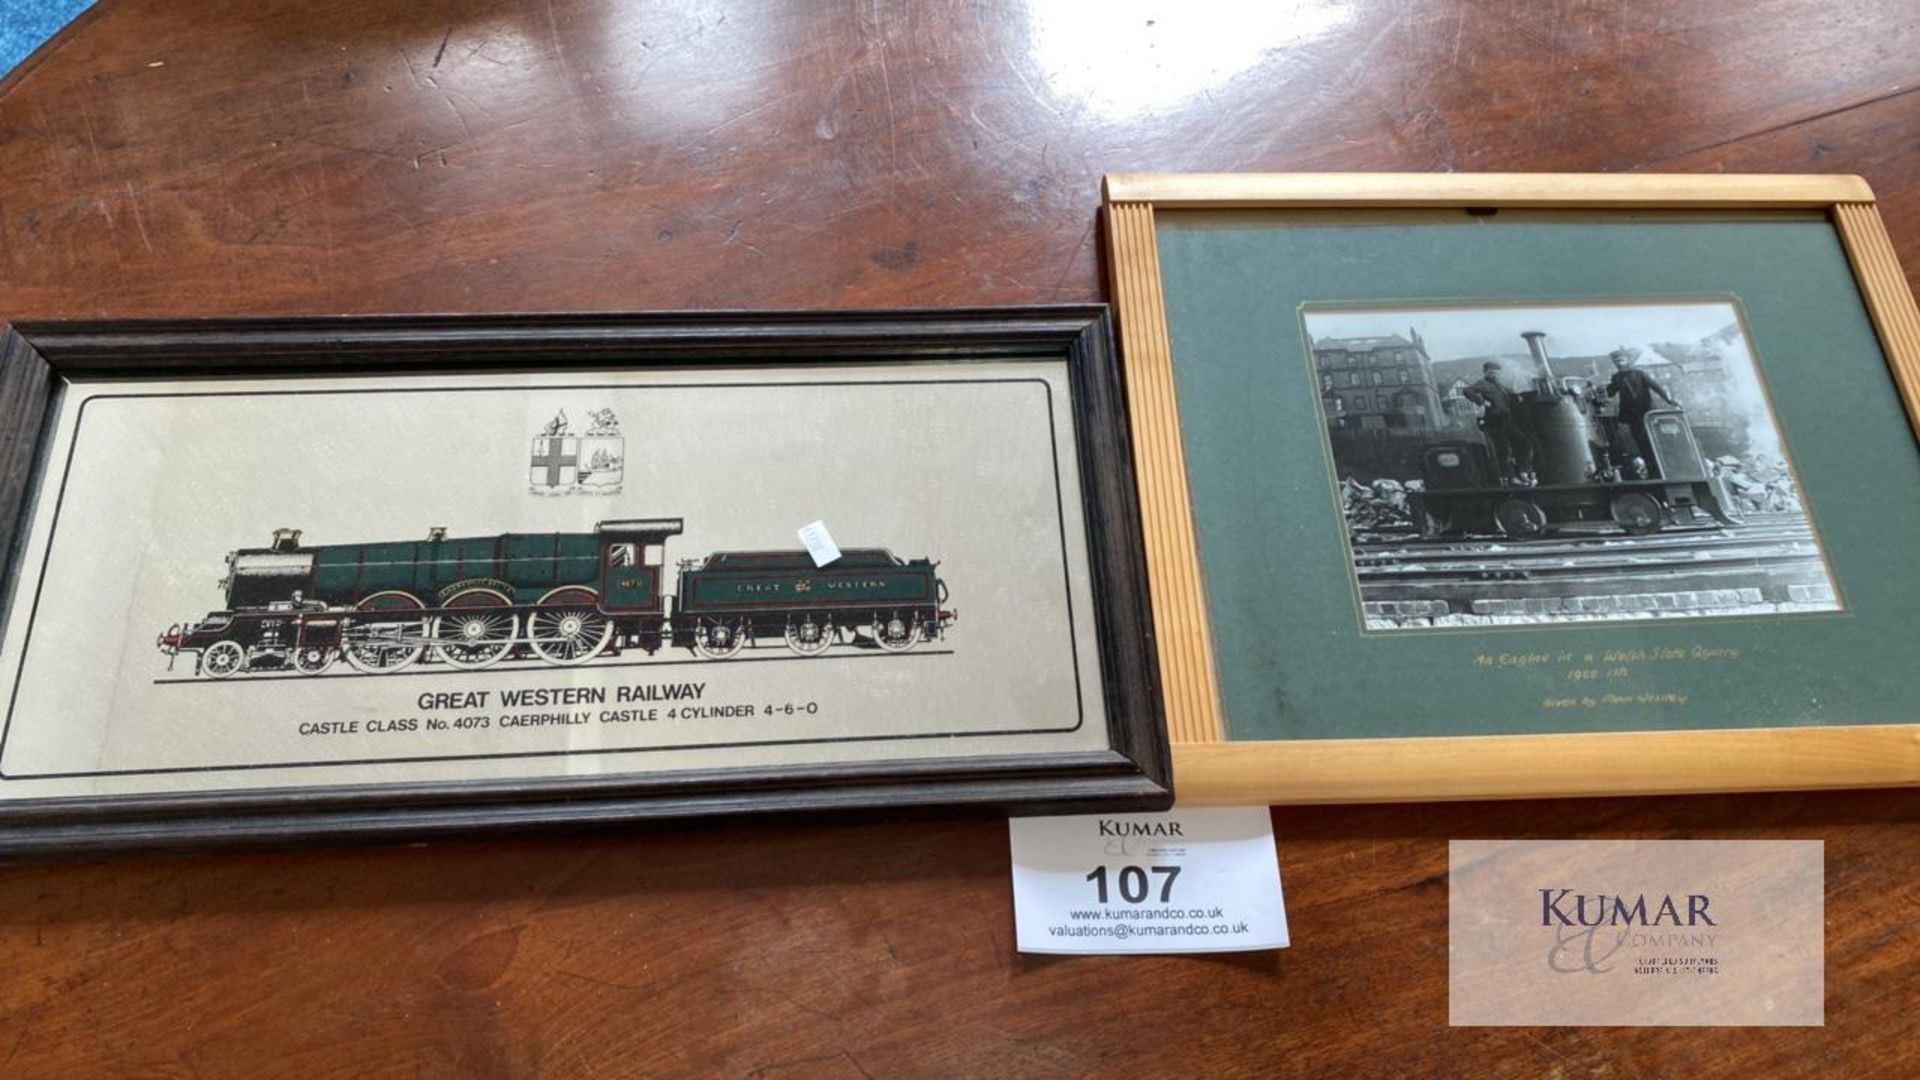 Train pictures in frames - Image 10 of 18